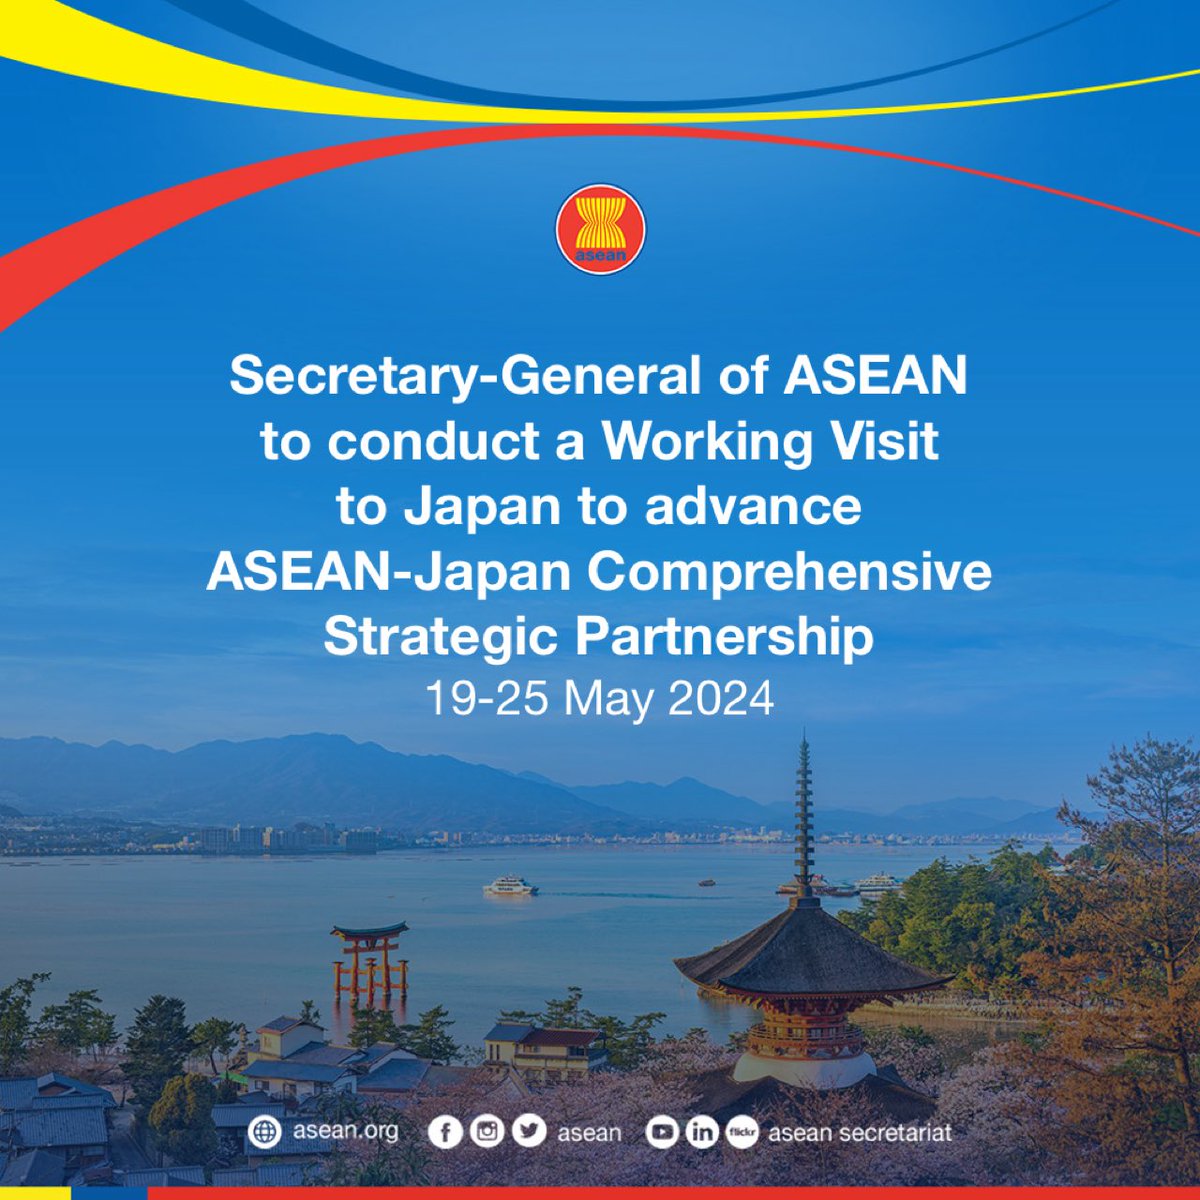 At the invitation of Professor Tetsuya Watanabe, President of the Economic Research Institute for ASEAN and East Asia (ERIA), the Secretary-General of ASEAN, Dr Kao Kim Hourn,will lead the ASEAN Secretariat delegation for a Working Visit to Japan, on 19-25 May 2024. During the